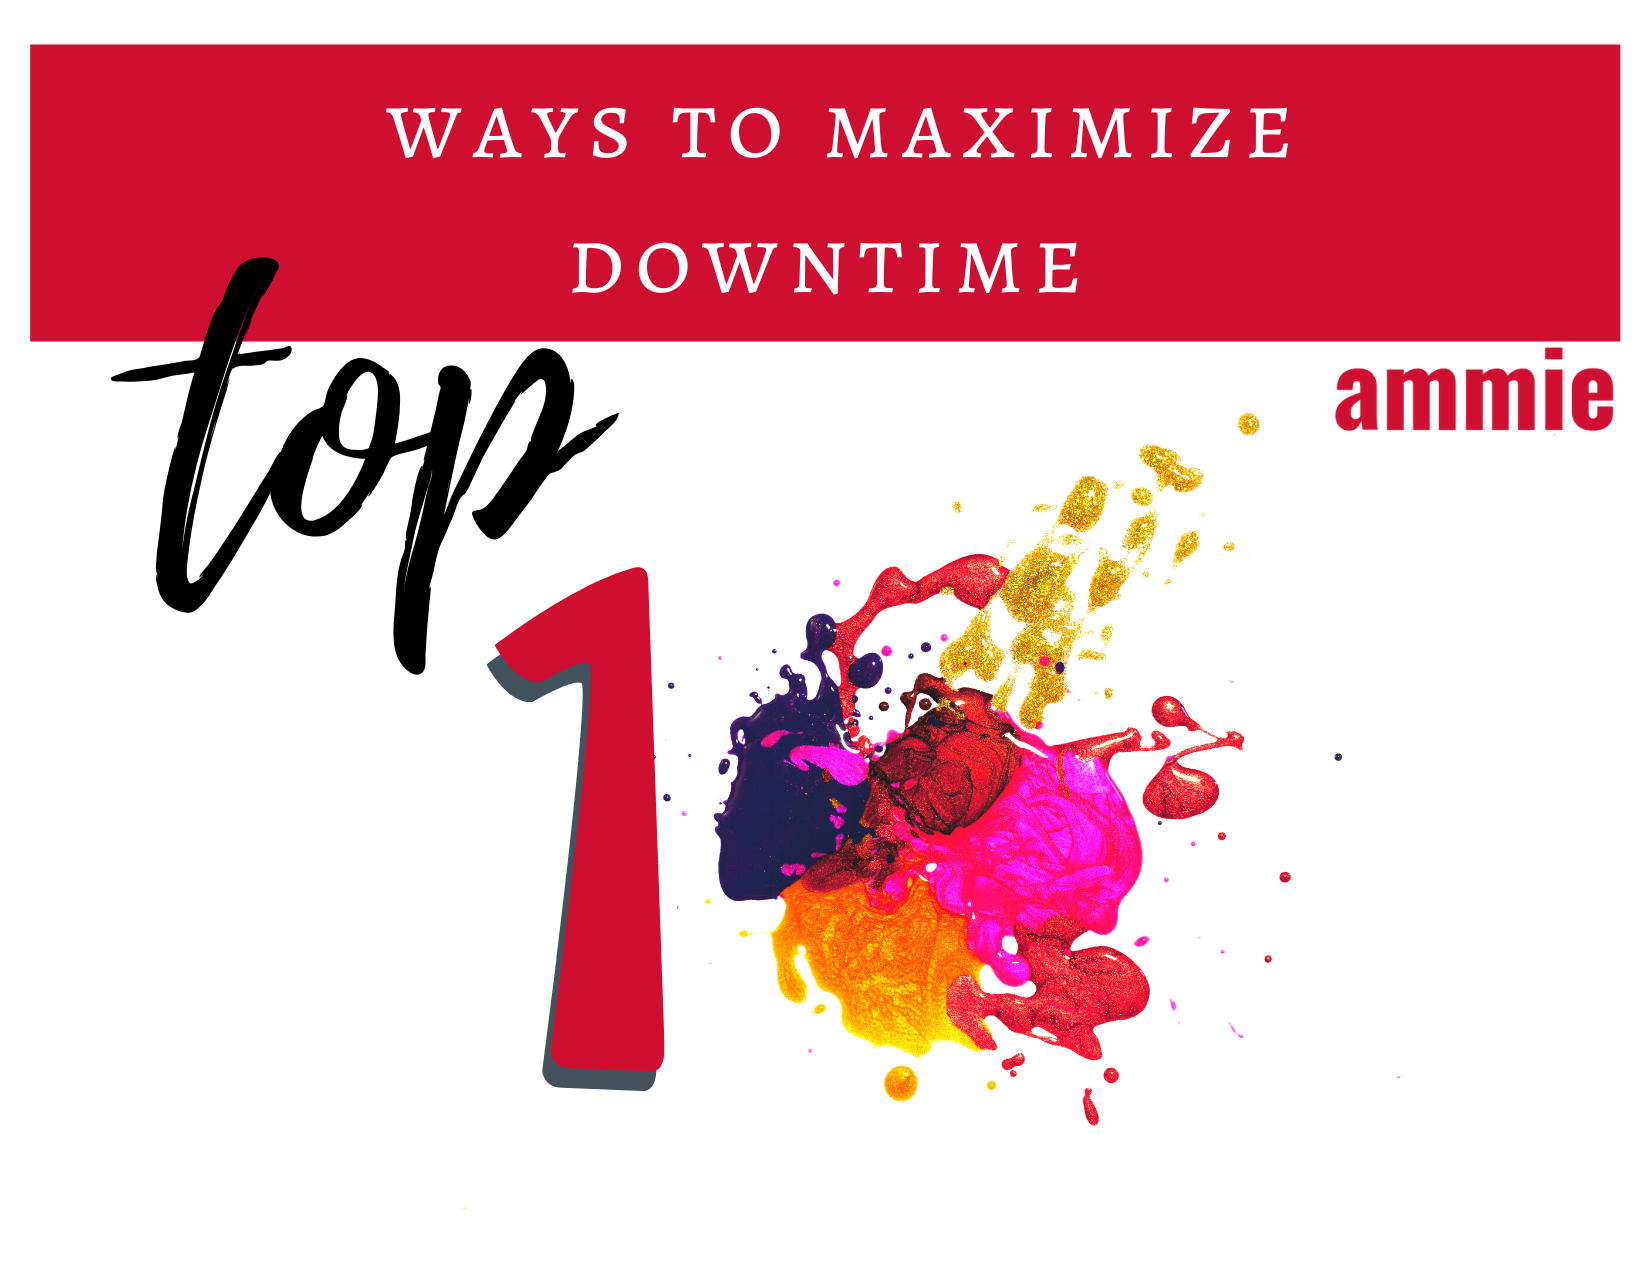 Top 10 Ways to Maximize Downtime